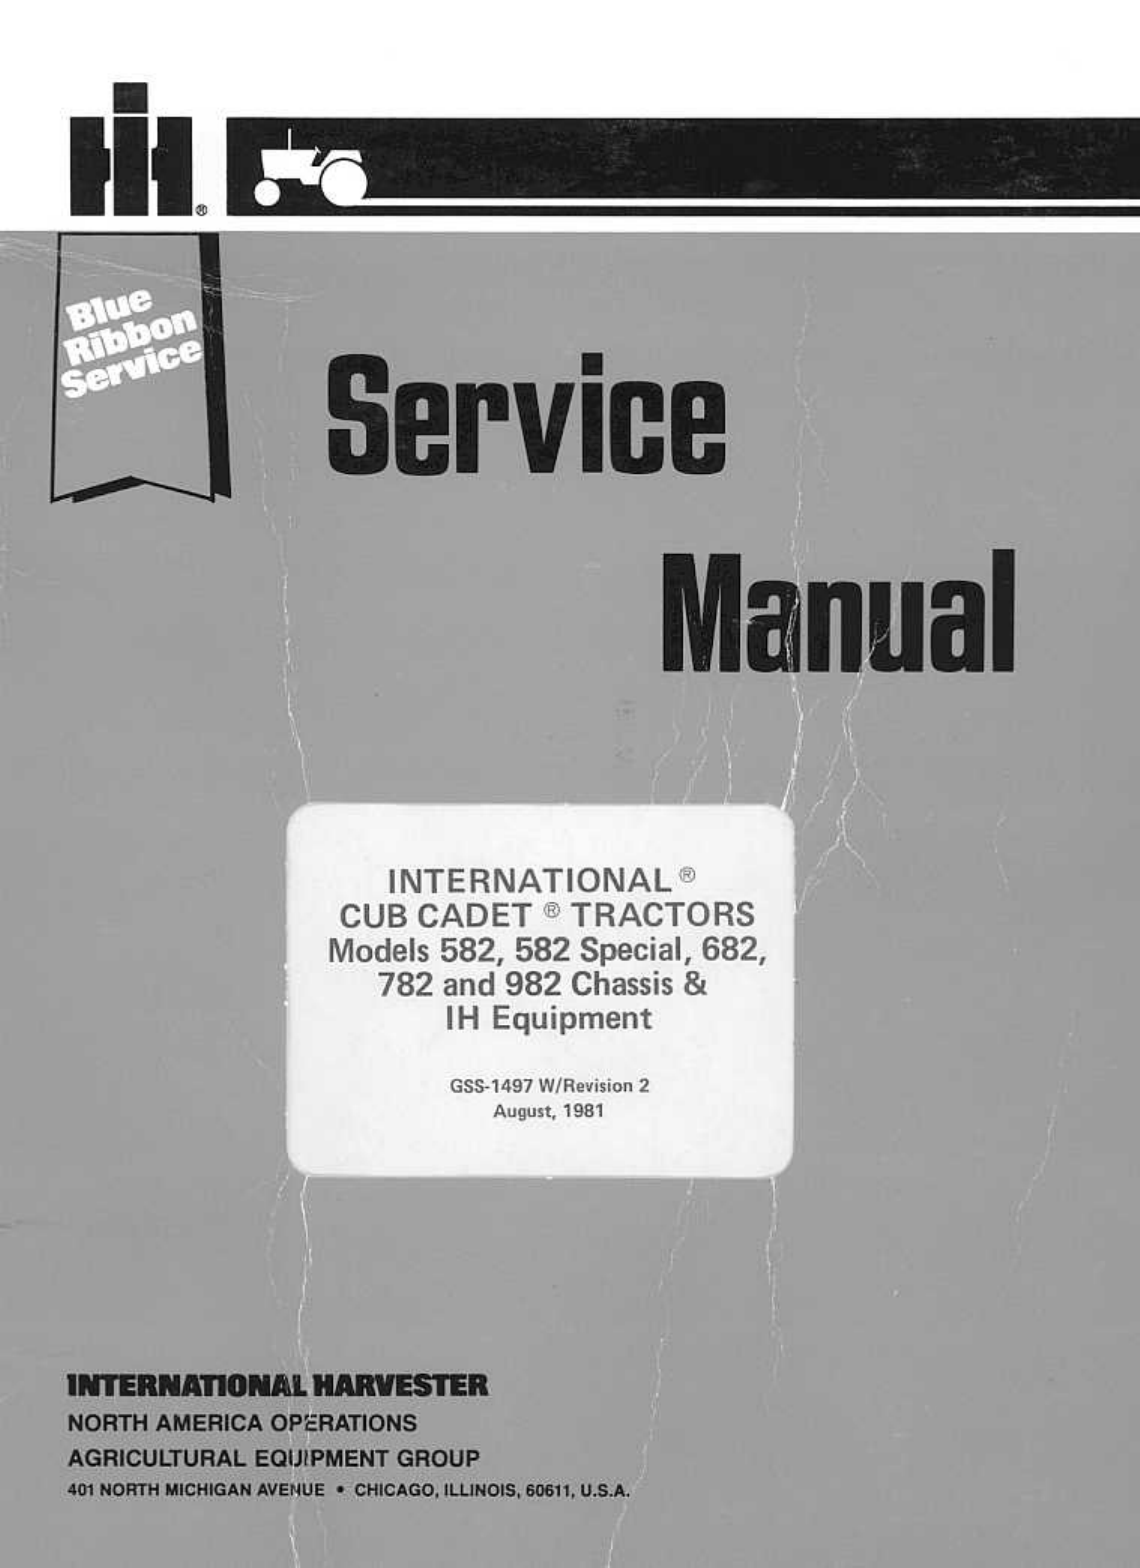 1979-1986 International Cub Cadet 582, 582 special, 682, 782, 982 garden tractor service manual Preview image 1